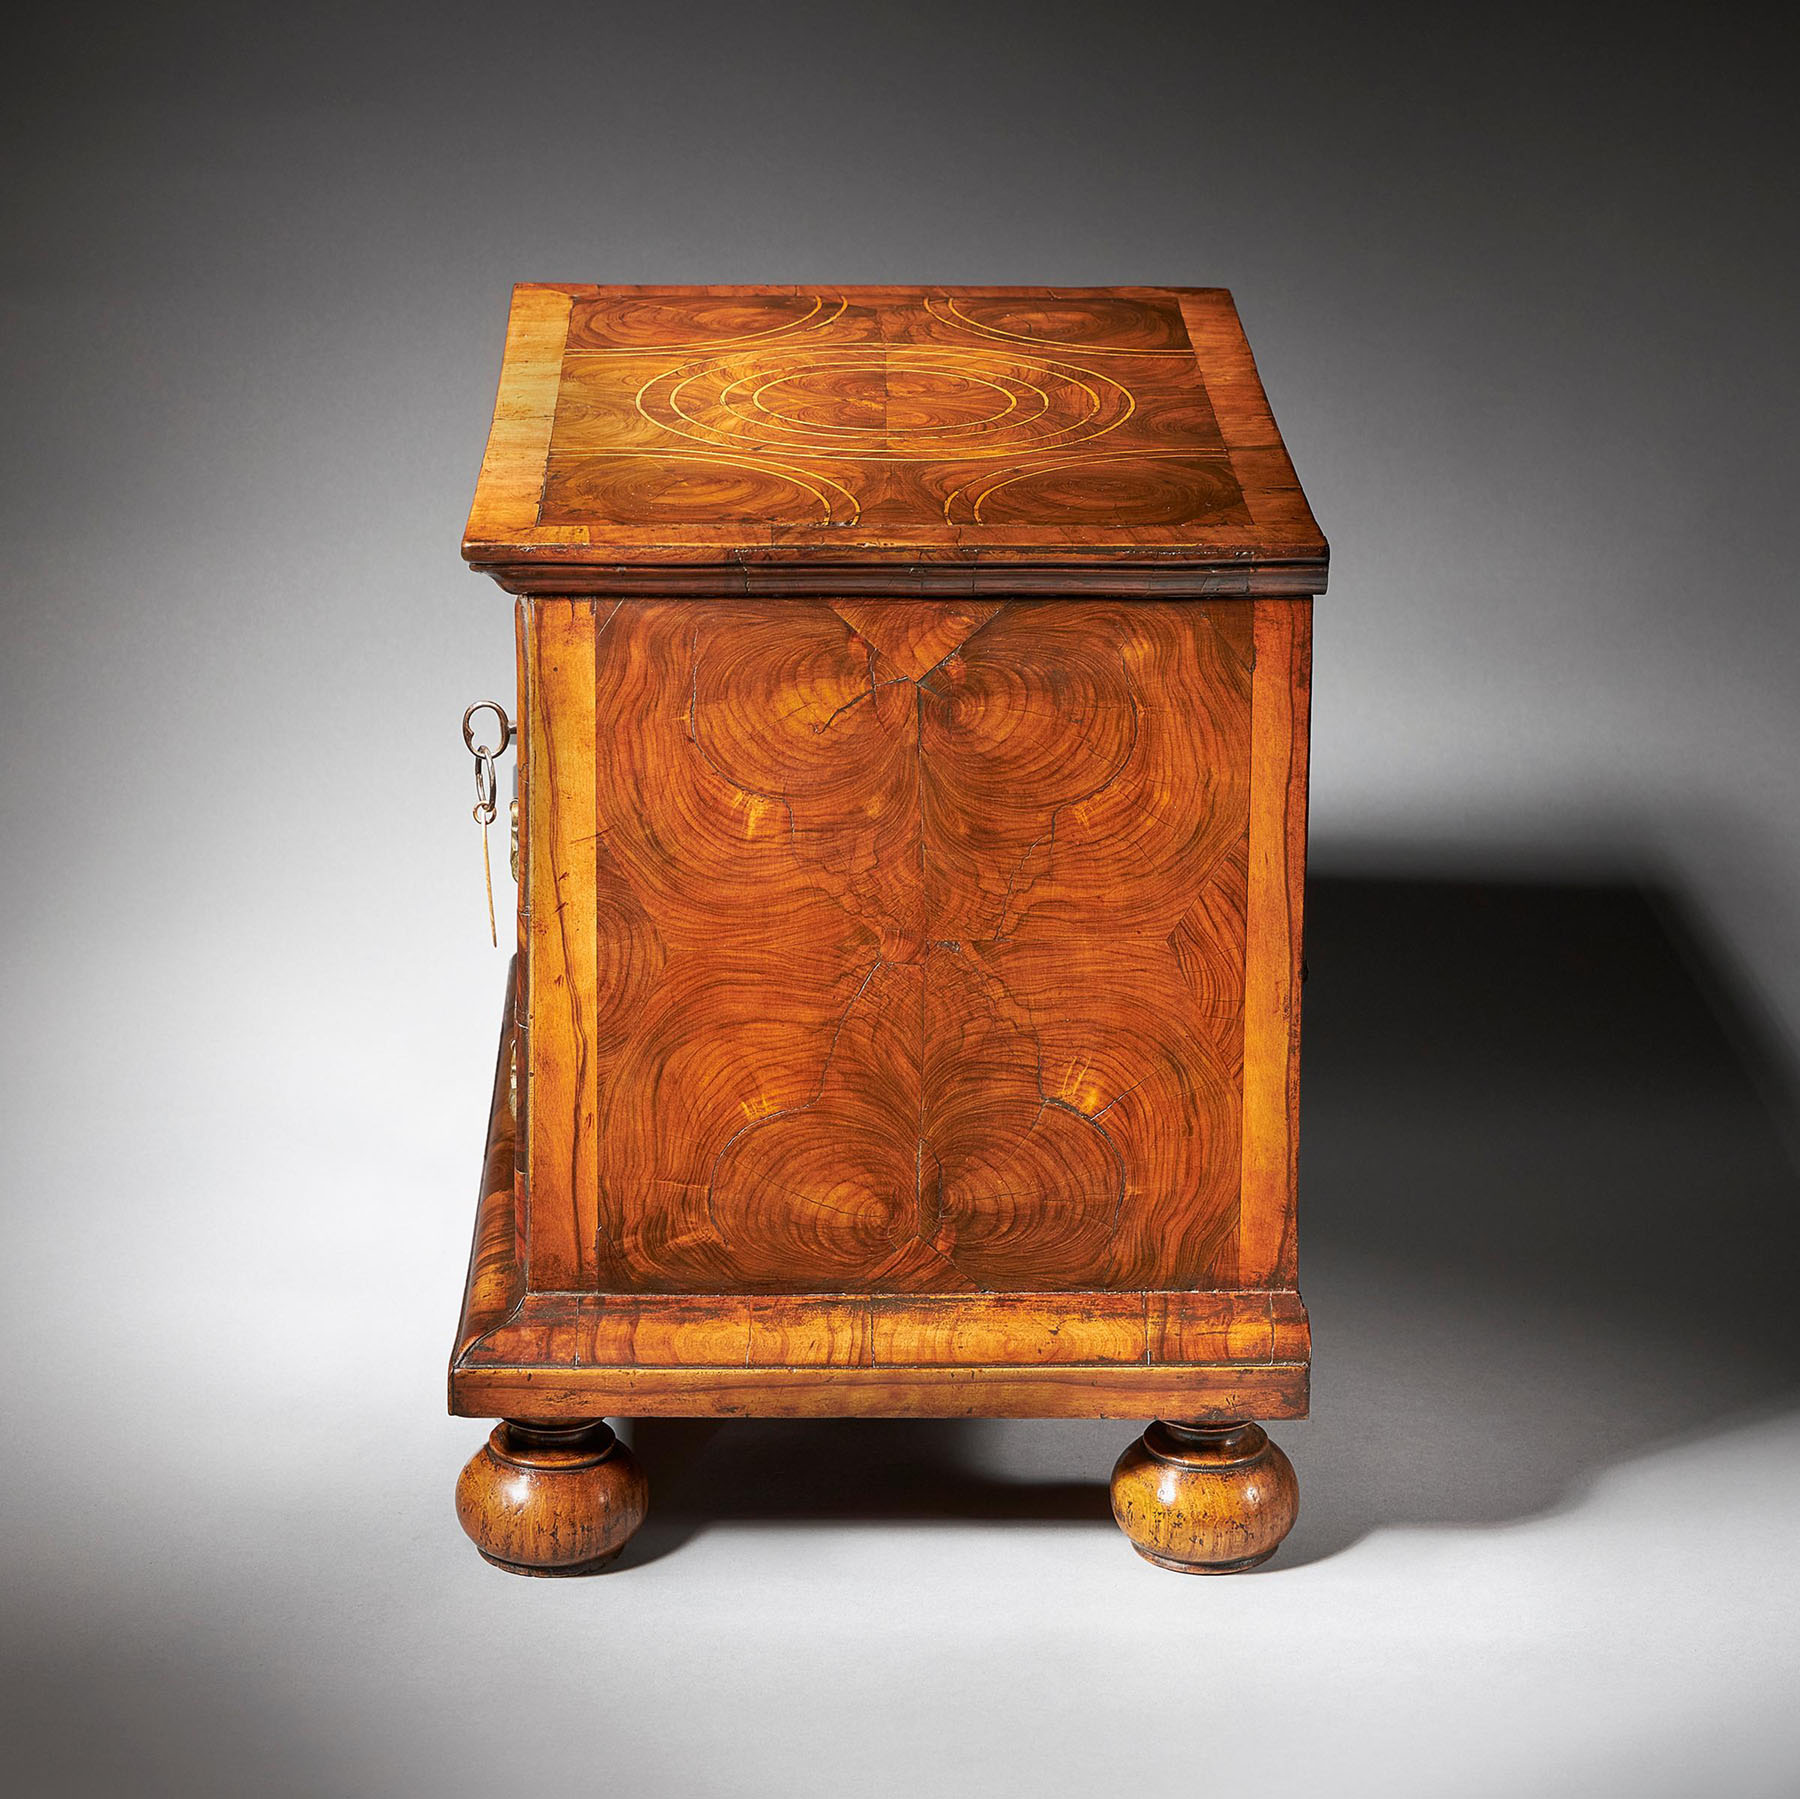 Diminutive 17th century William and Mary Olive Oyster Miniature Chest of Drawers 15